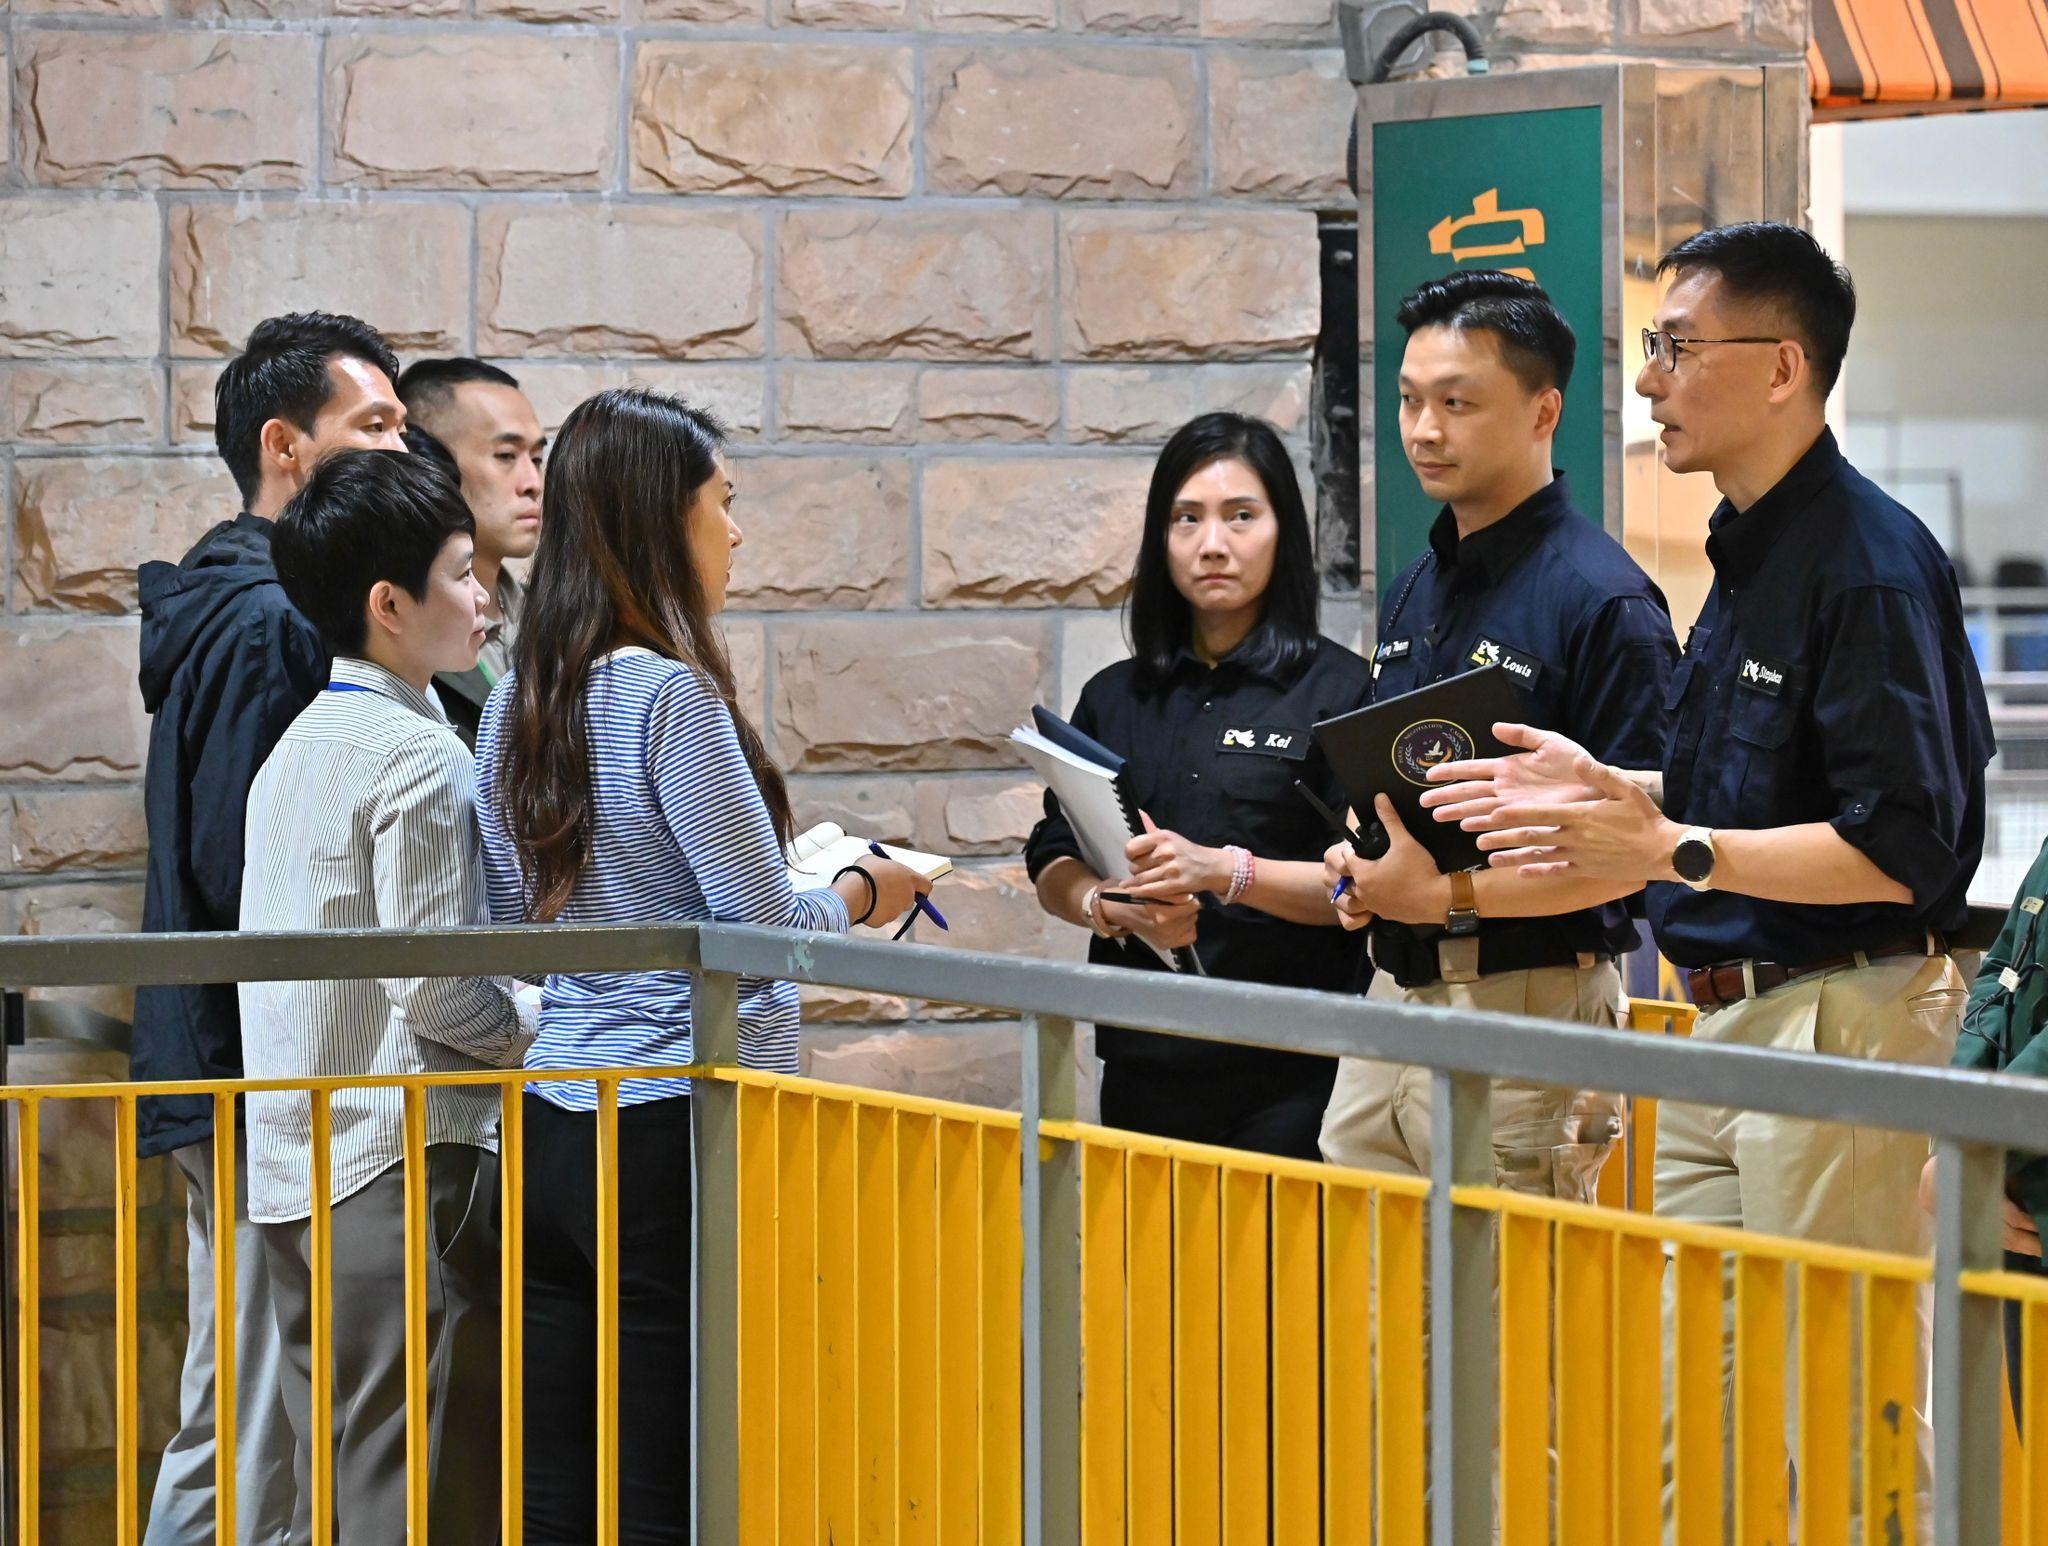 The Police Negotiation Cadre (PNC) concluded the two-week comprehensive Crisis Negotiation Course (CNC) at the Hong Kong Police College today (December 1). Photo shows the Commanding Officer of PNC Liauw Ka-kei (first right) and other instructors reviewing the CNC trainees’ performance and offering suggestions for improvement at the debriefing session after the negotiation exercise.